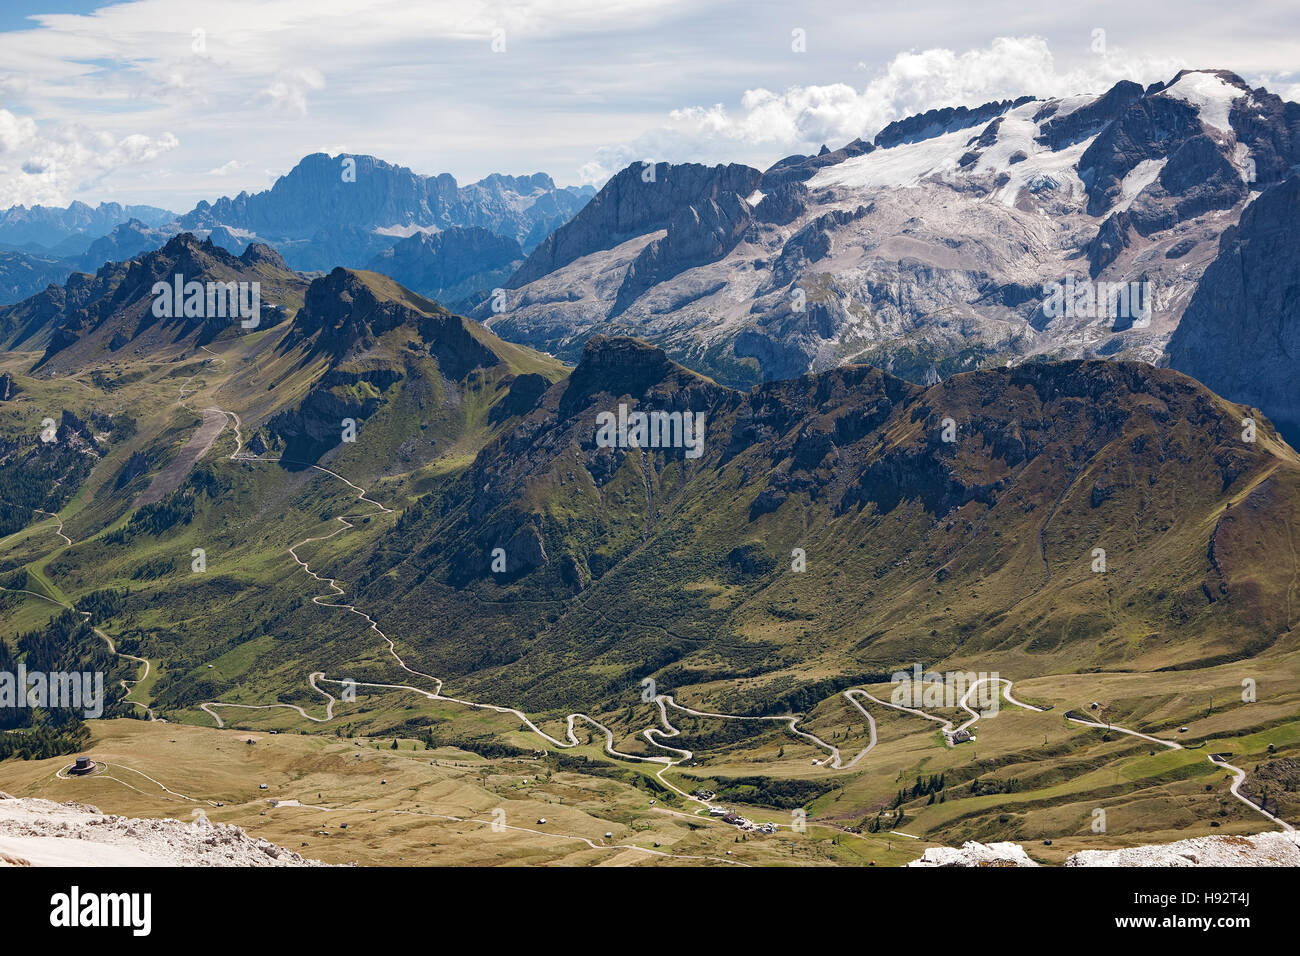 View from the Canazei ski resort showing the distant Dolomite mountain range, Trentino region, South Tyrol, Italy. Stock Photo